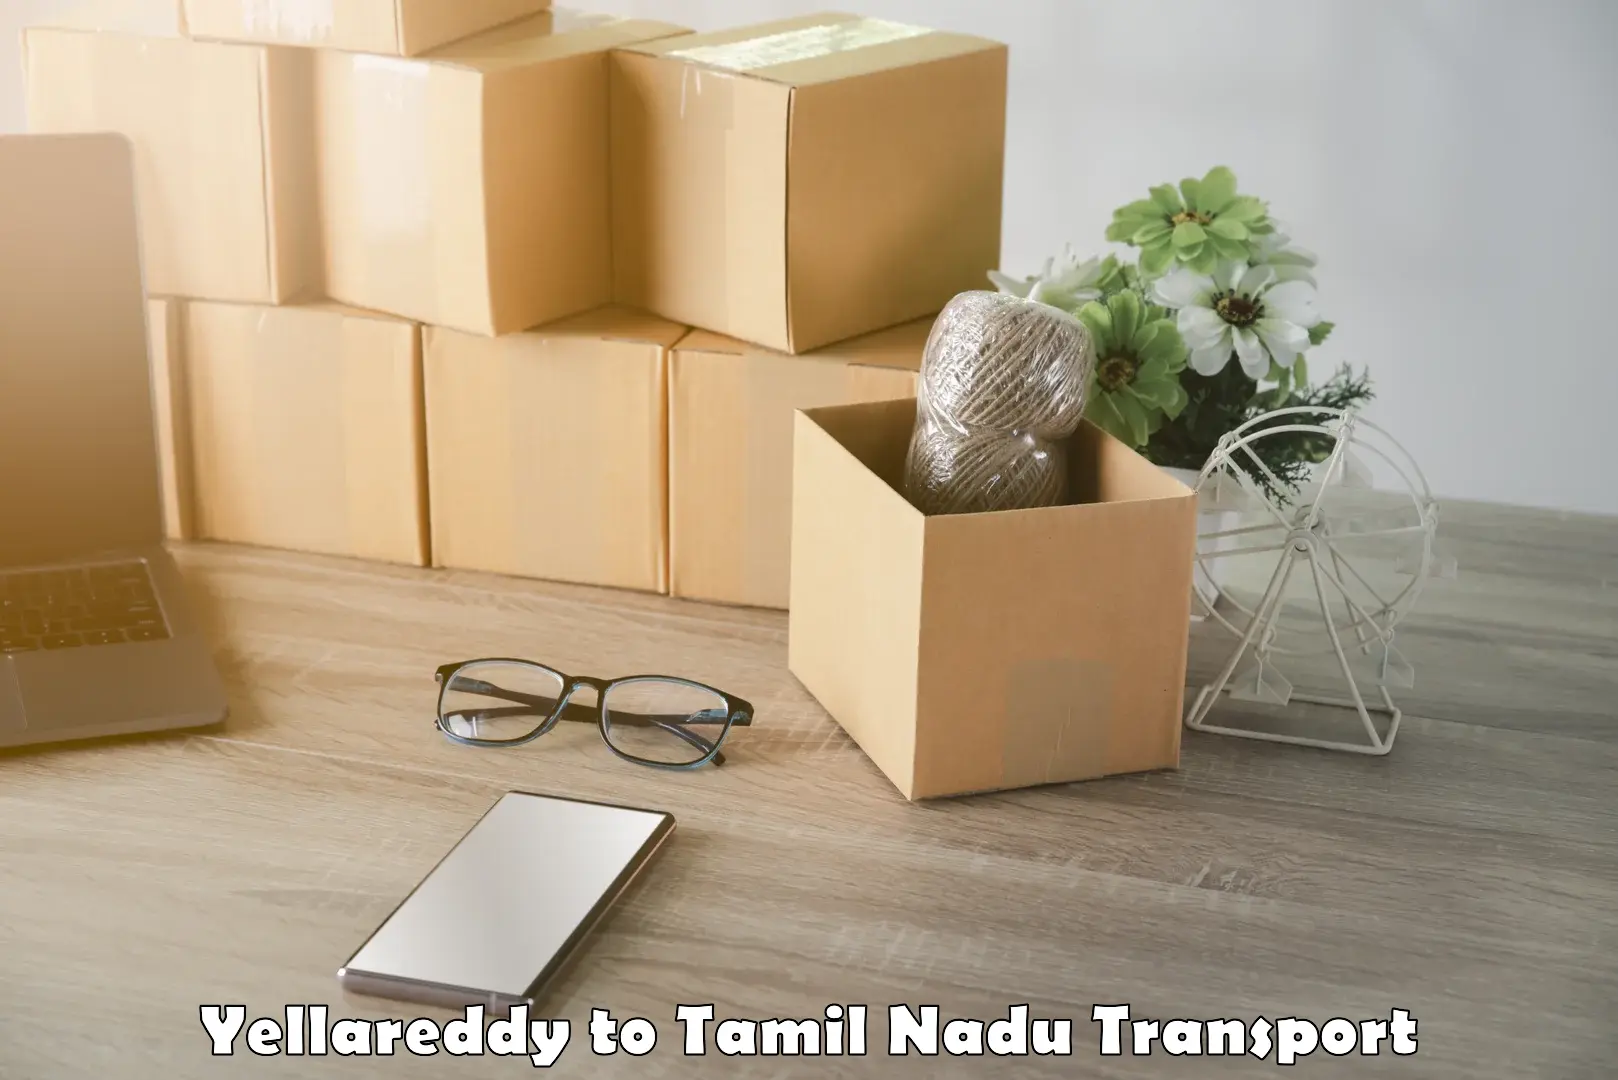 Delivery service Yellareddy to Omalur